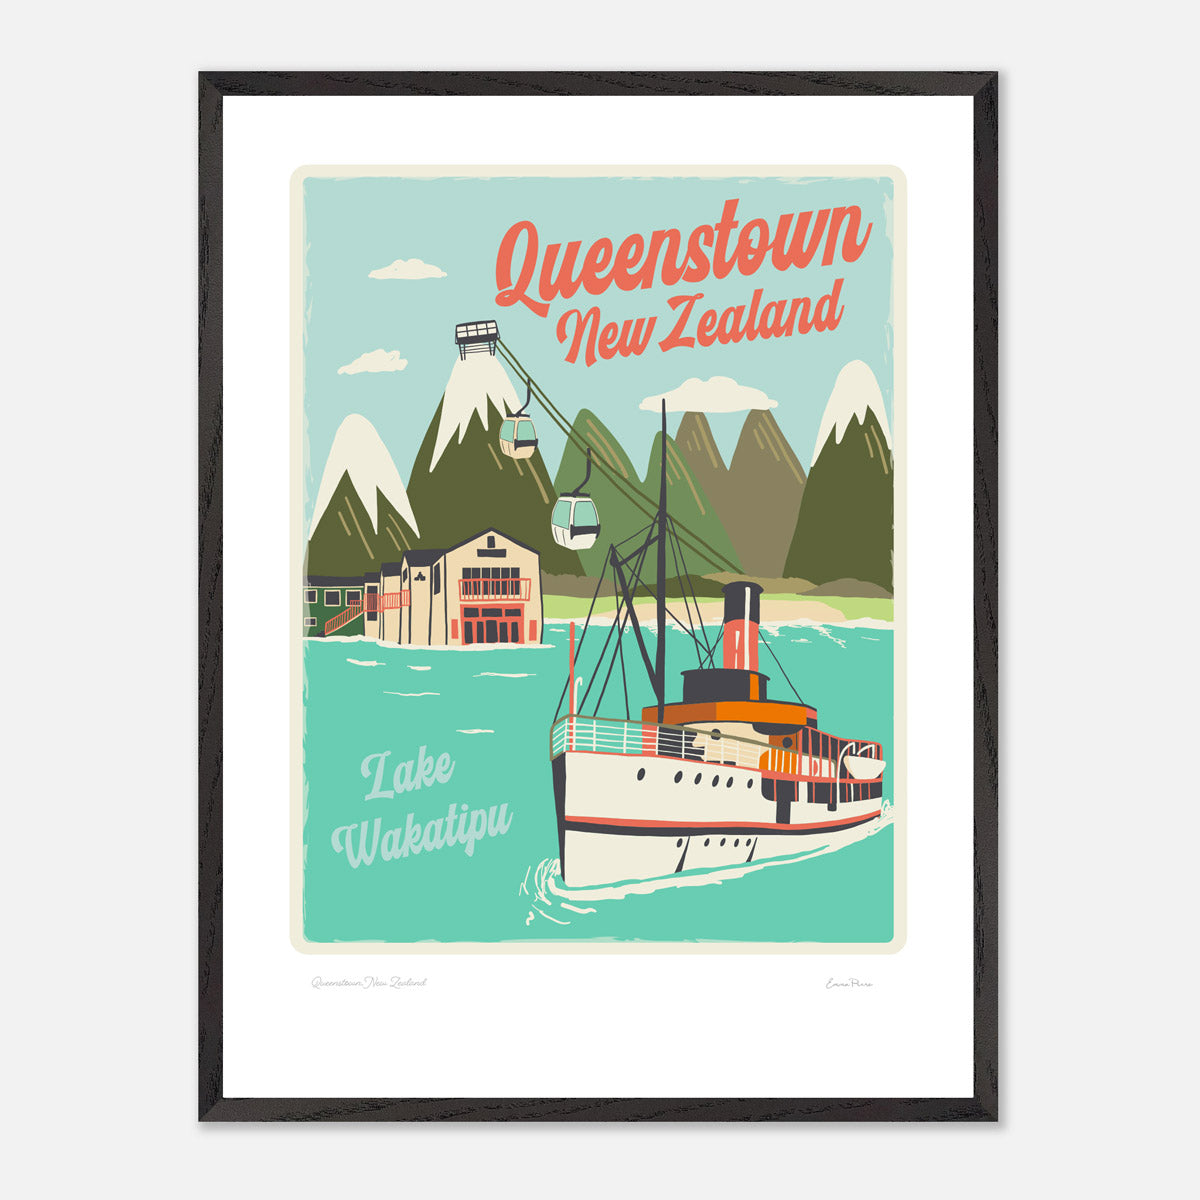 Framed Travel Poster of Queenstown New Zealand. Illustration Art Print of Queenstown, New Zealand by Studio Peers showing lake wakatipu, skyline gondola and The Earnslaw A2 size